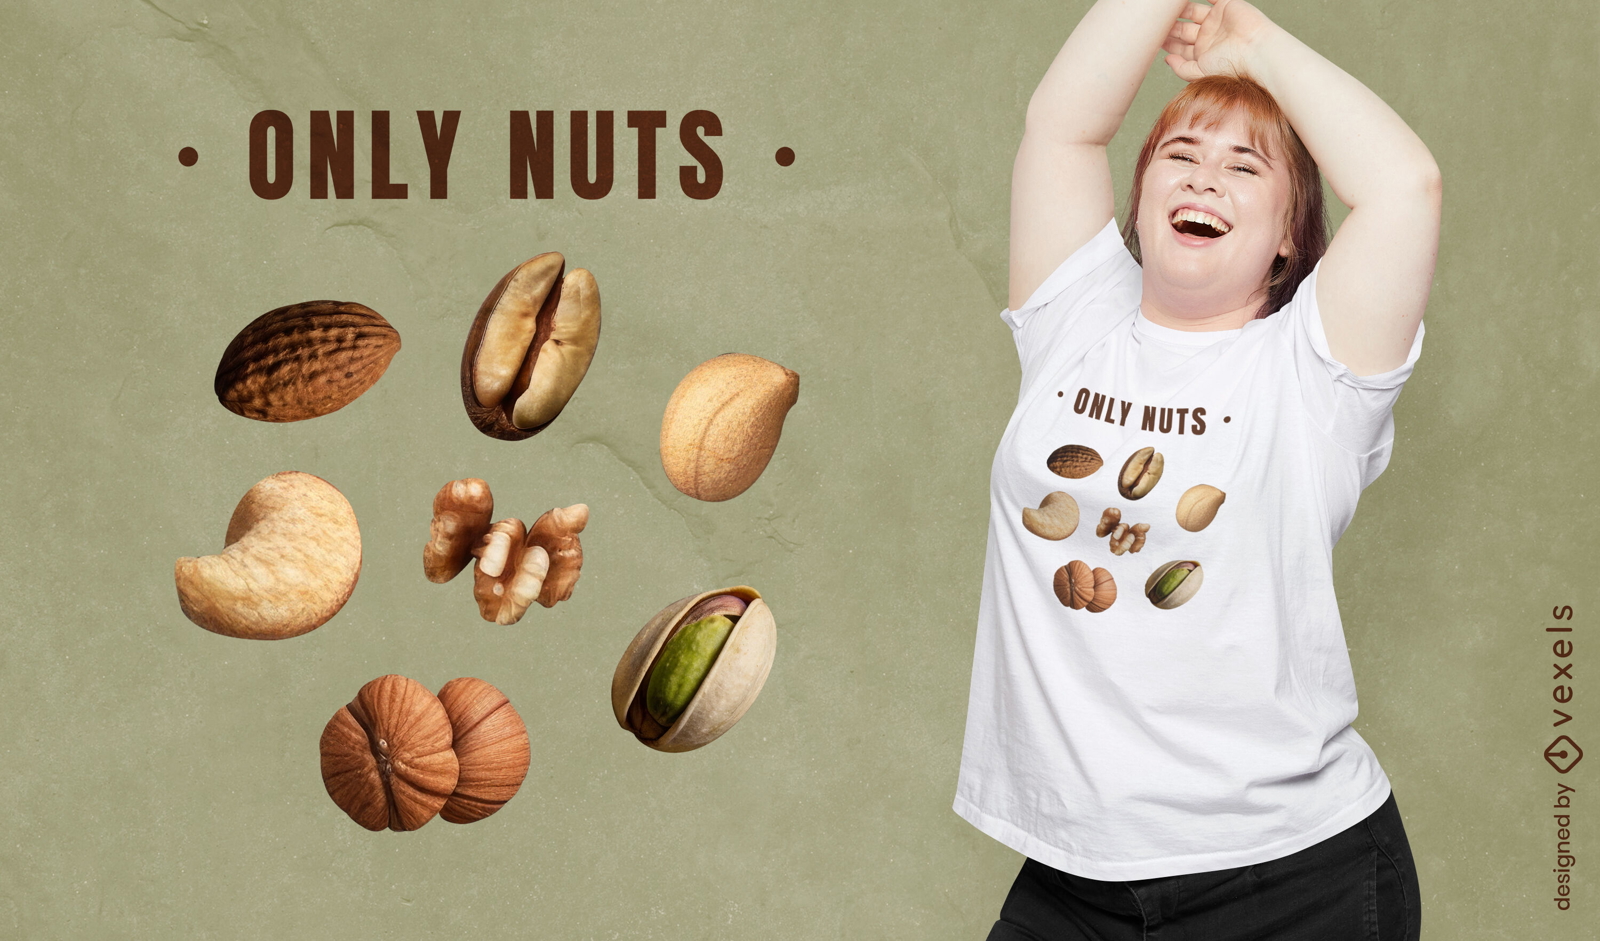 Only nuts t-shirt design